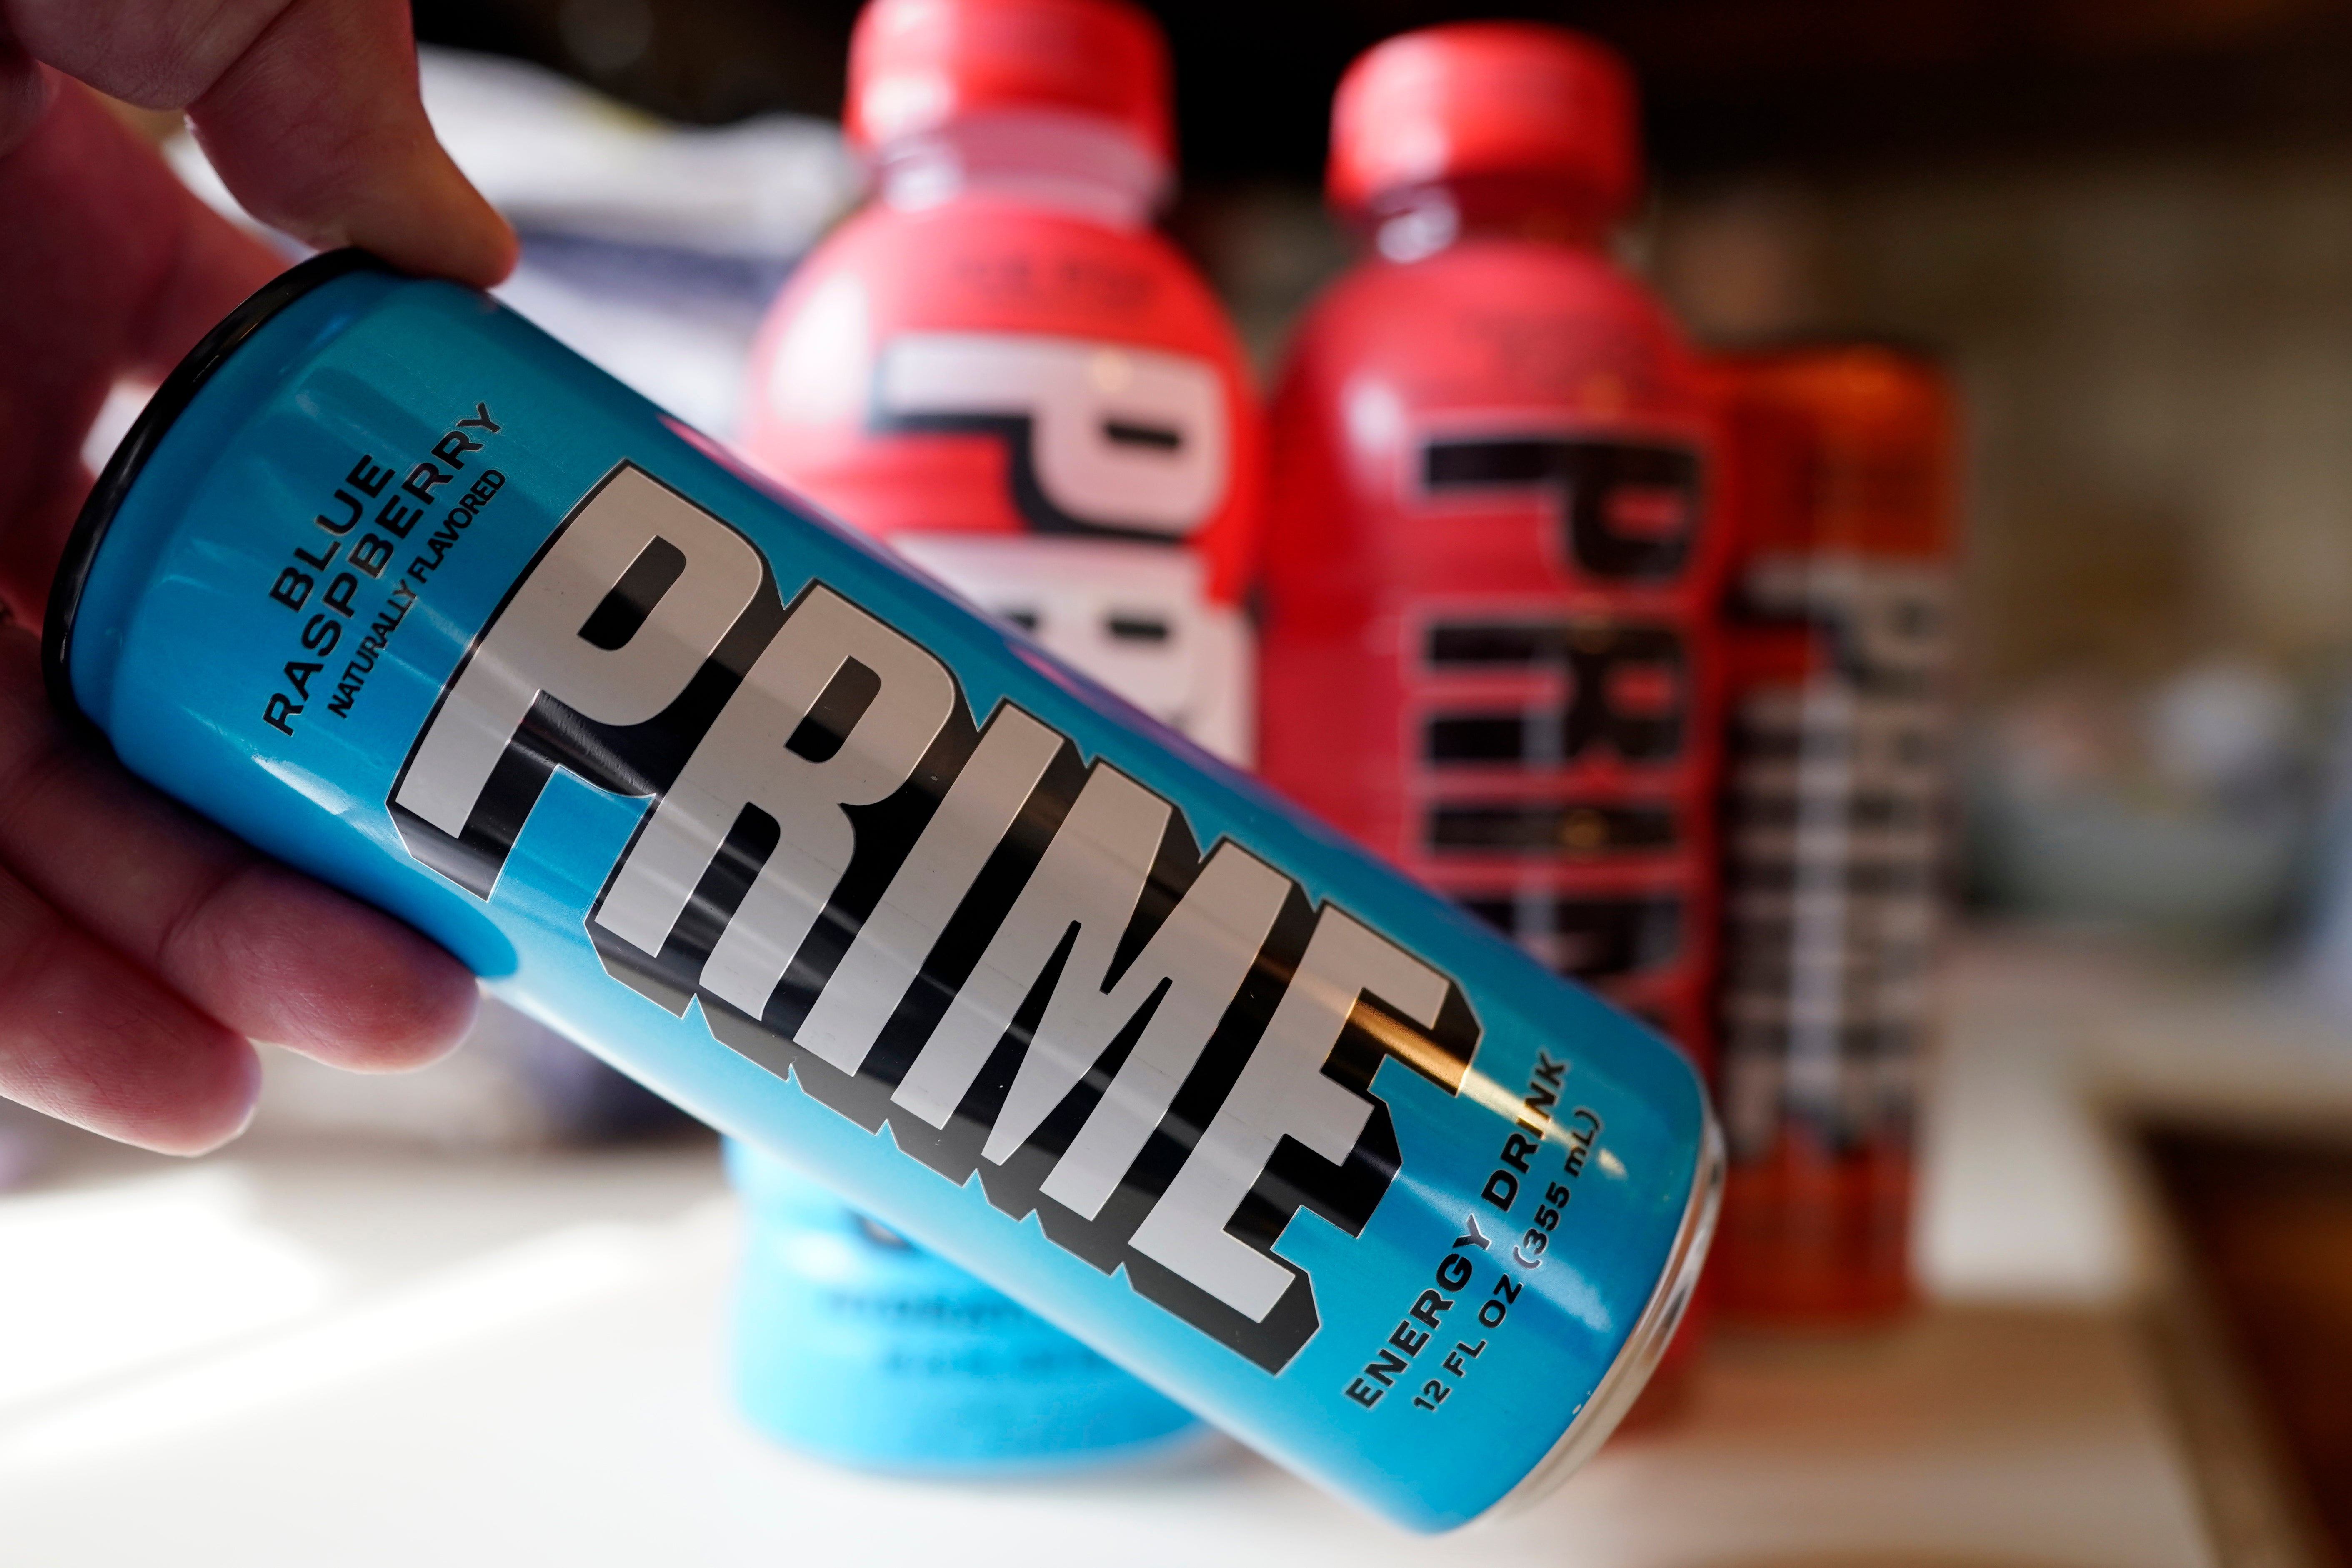 Popular Prime energy drink by Logan Paul that exceeds Canada's caffeine  limits to be recalled